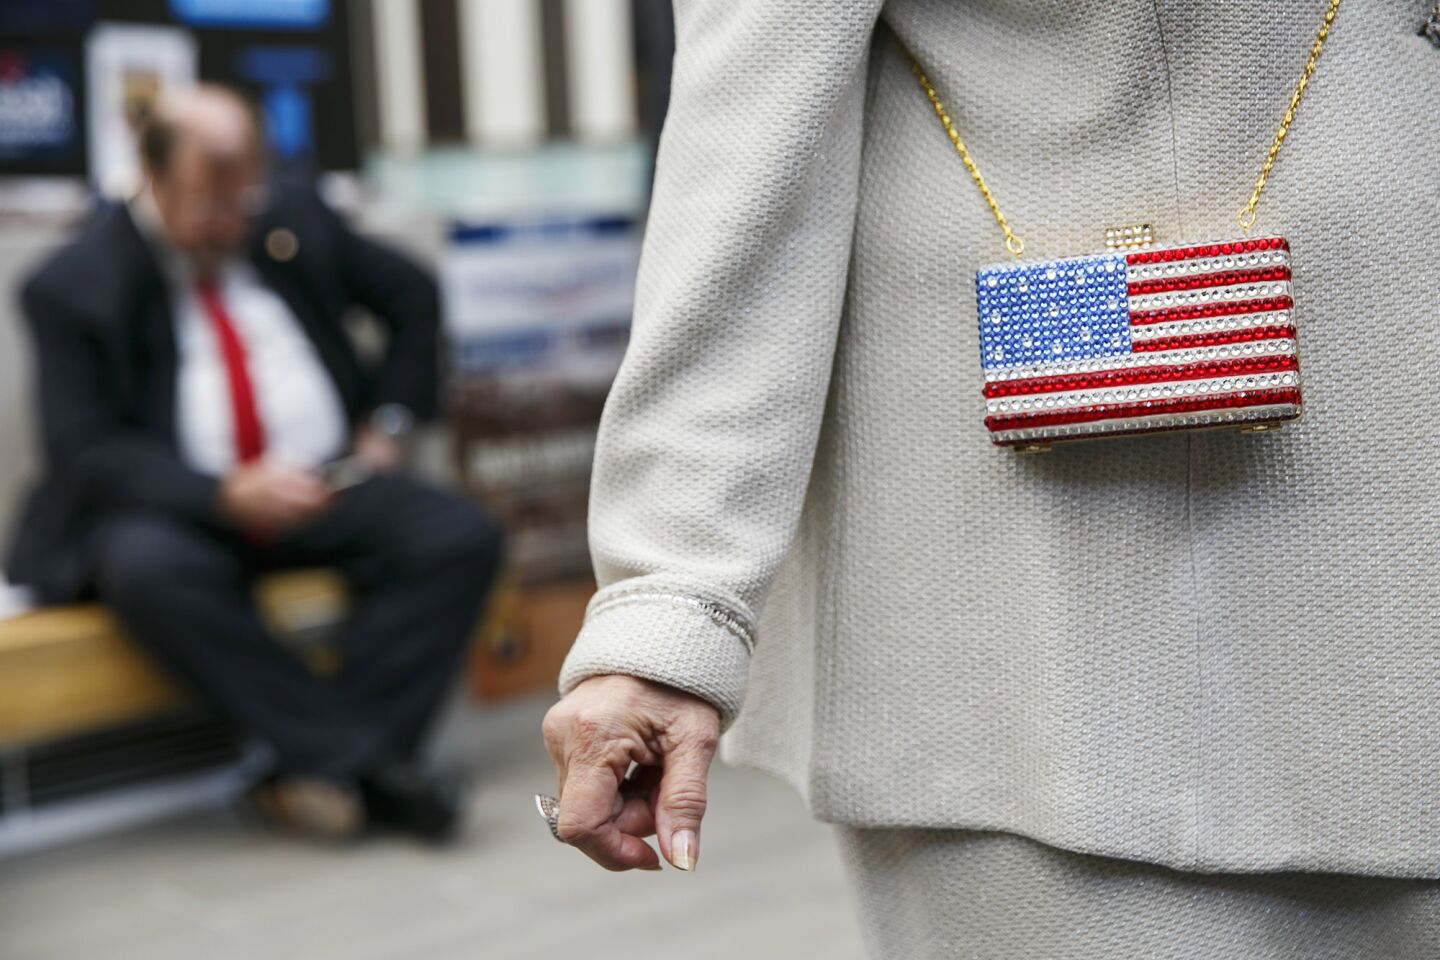 Elsie Gufle, wears a jeweled handbag featuring the American flag at the California Republican Party convention on Saturday.